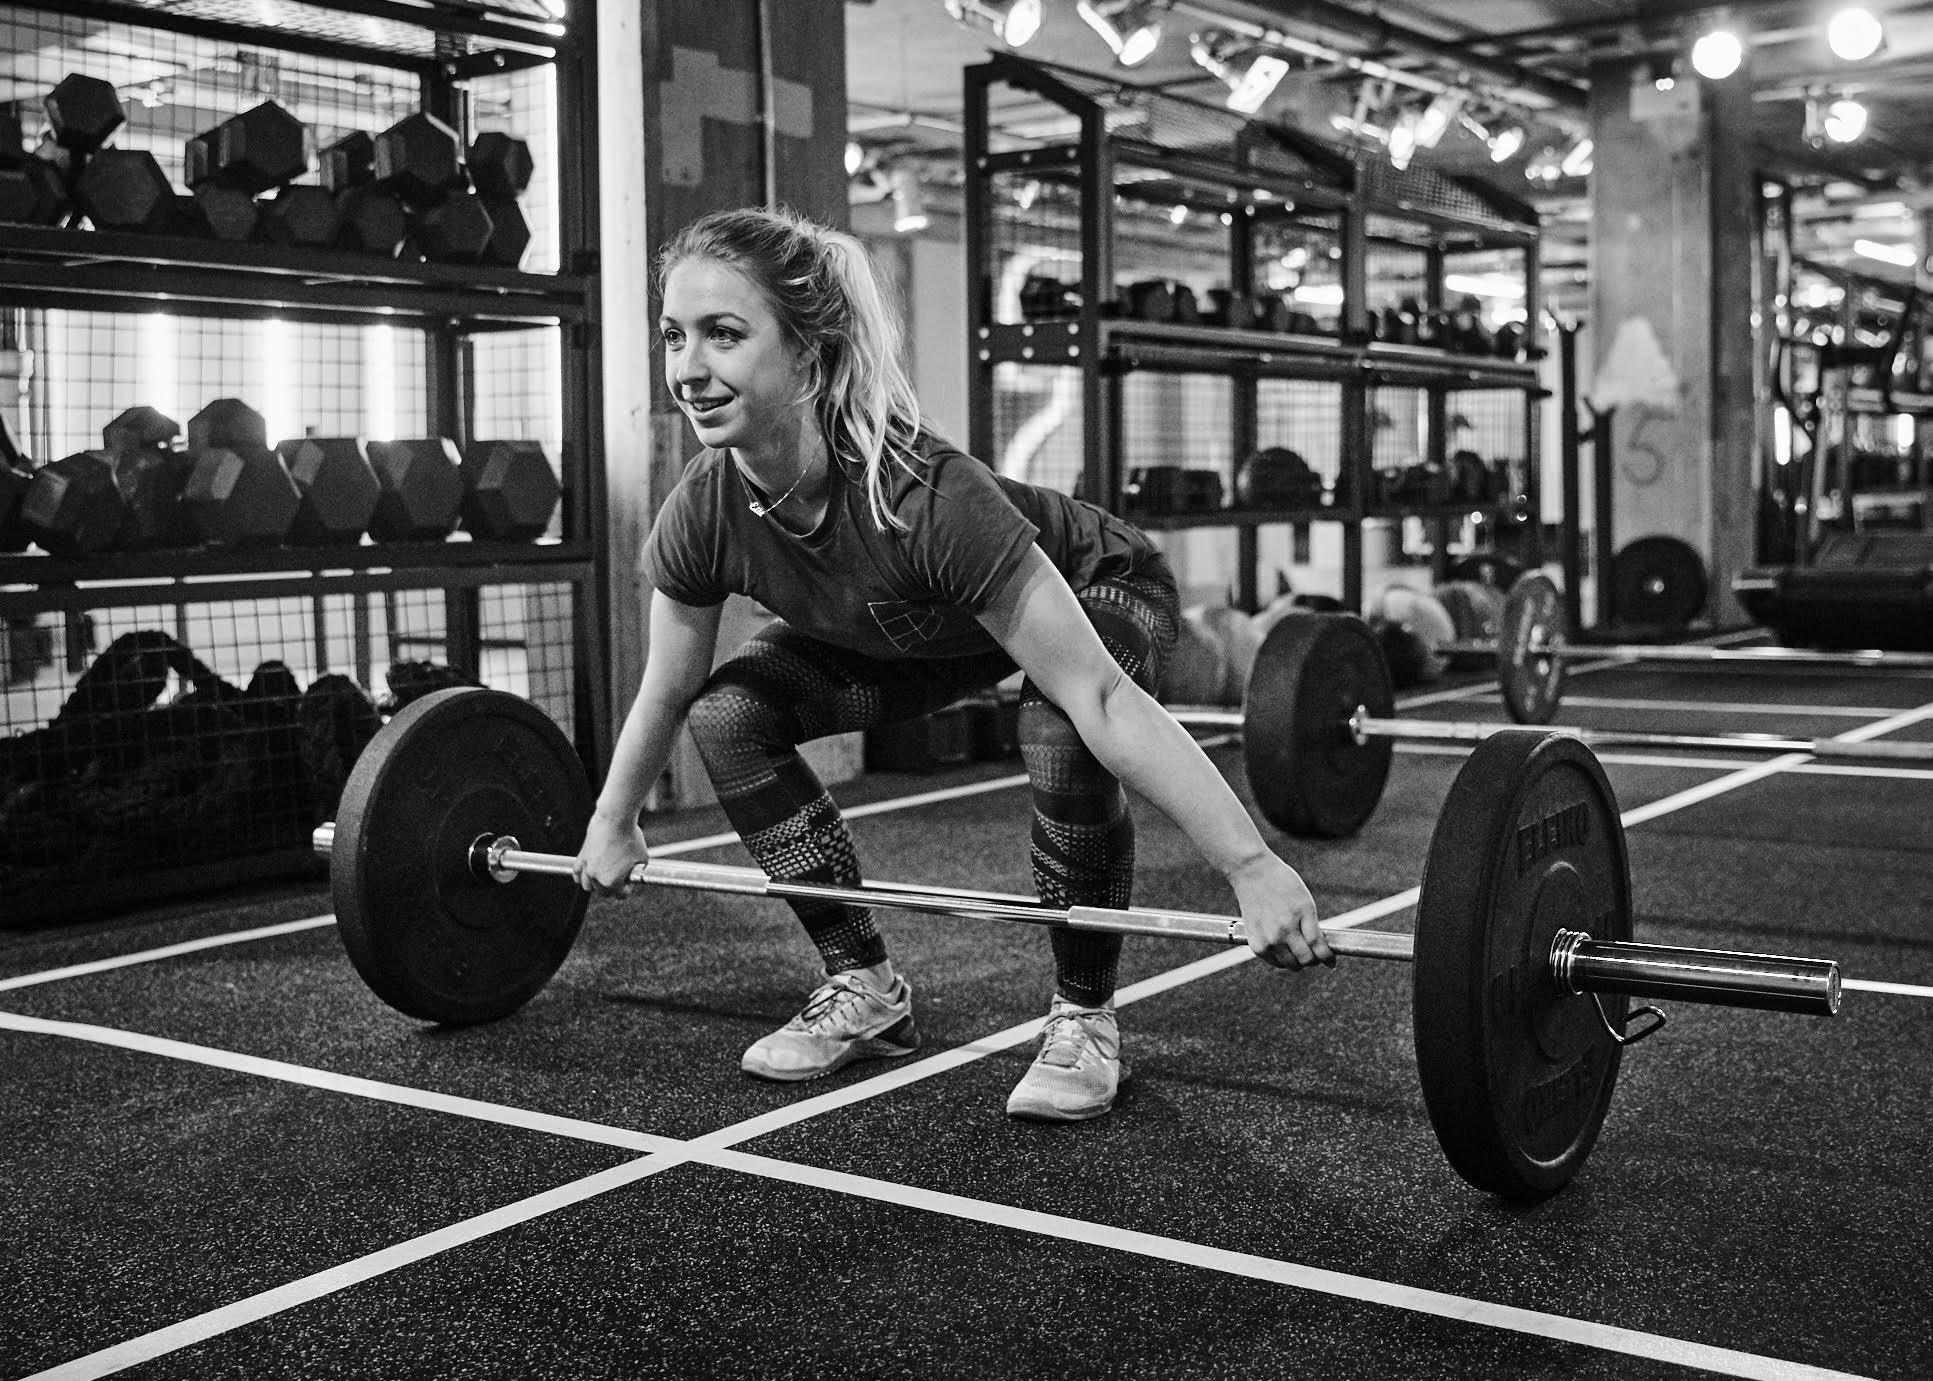 Binary Fitness Plans To Give CrossFit The Boutique Treatment